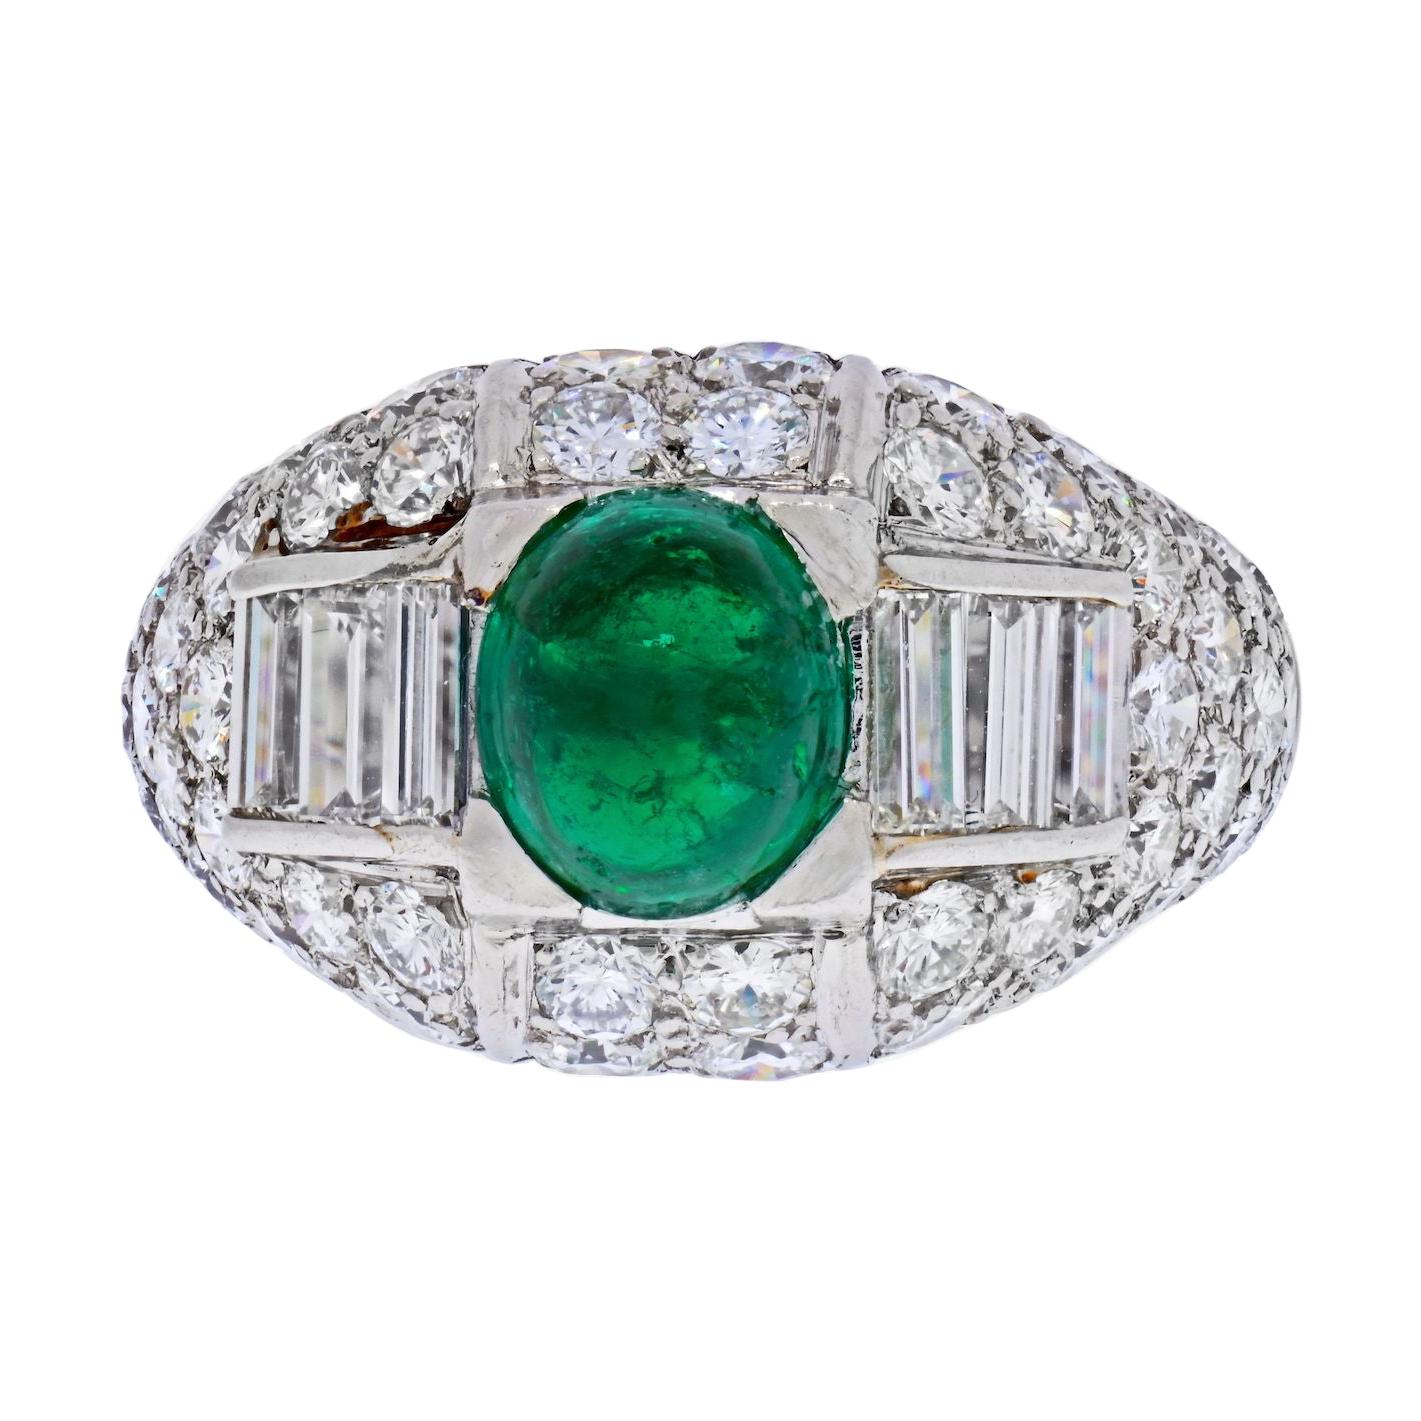 A beautiful platinum ring by Cartier from 1960's featuring cabochon cut green emerald and diaonds of mixed cuts. 
Delicate enough for everyday wear. The center emerald does show some wear to the gem however not very visisble to the naked eye and